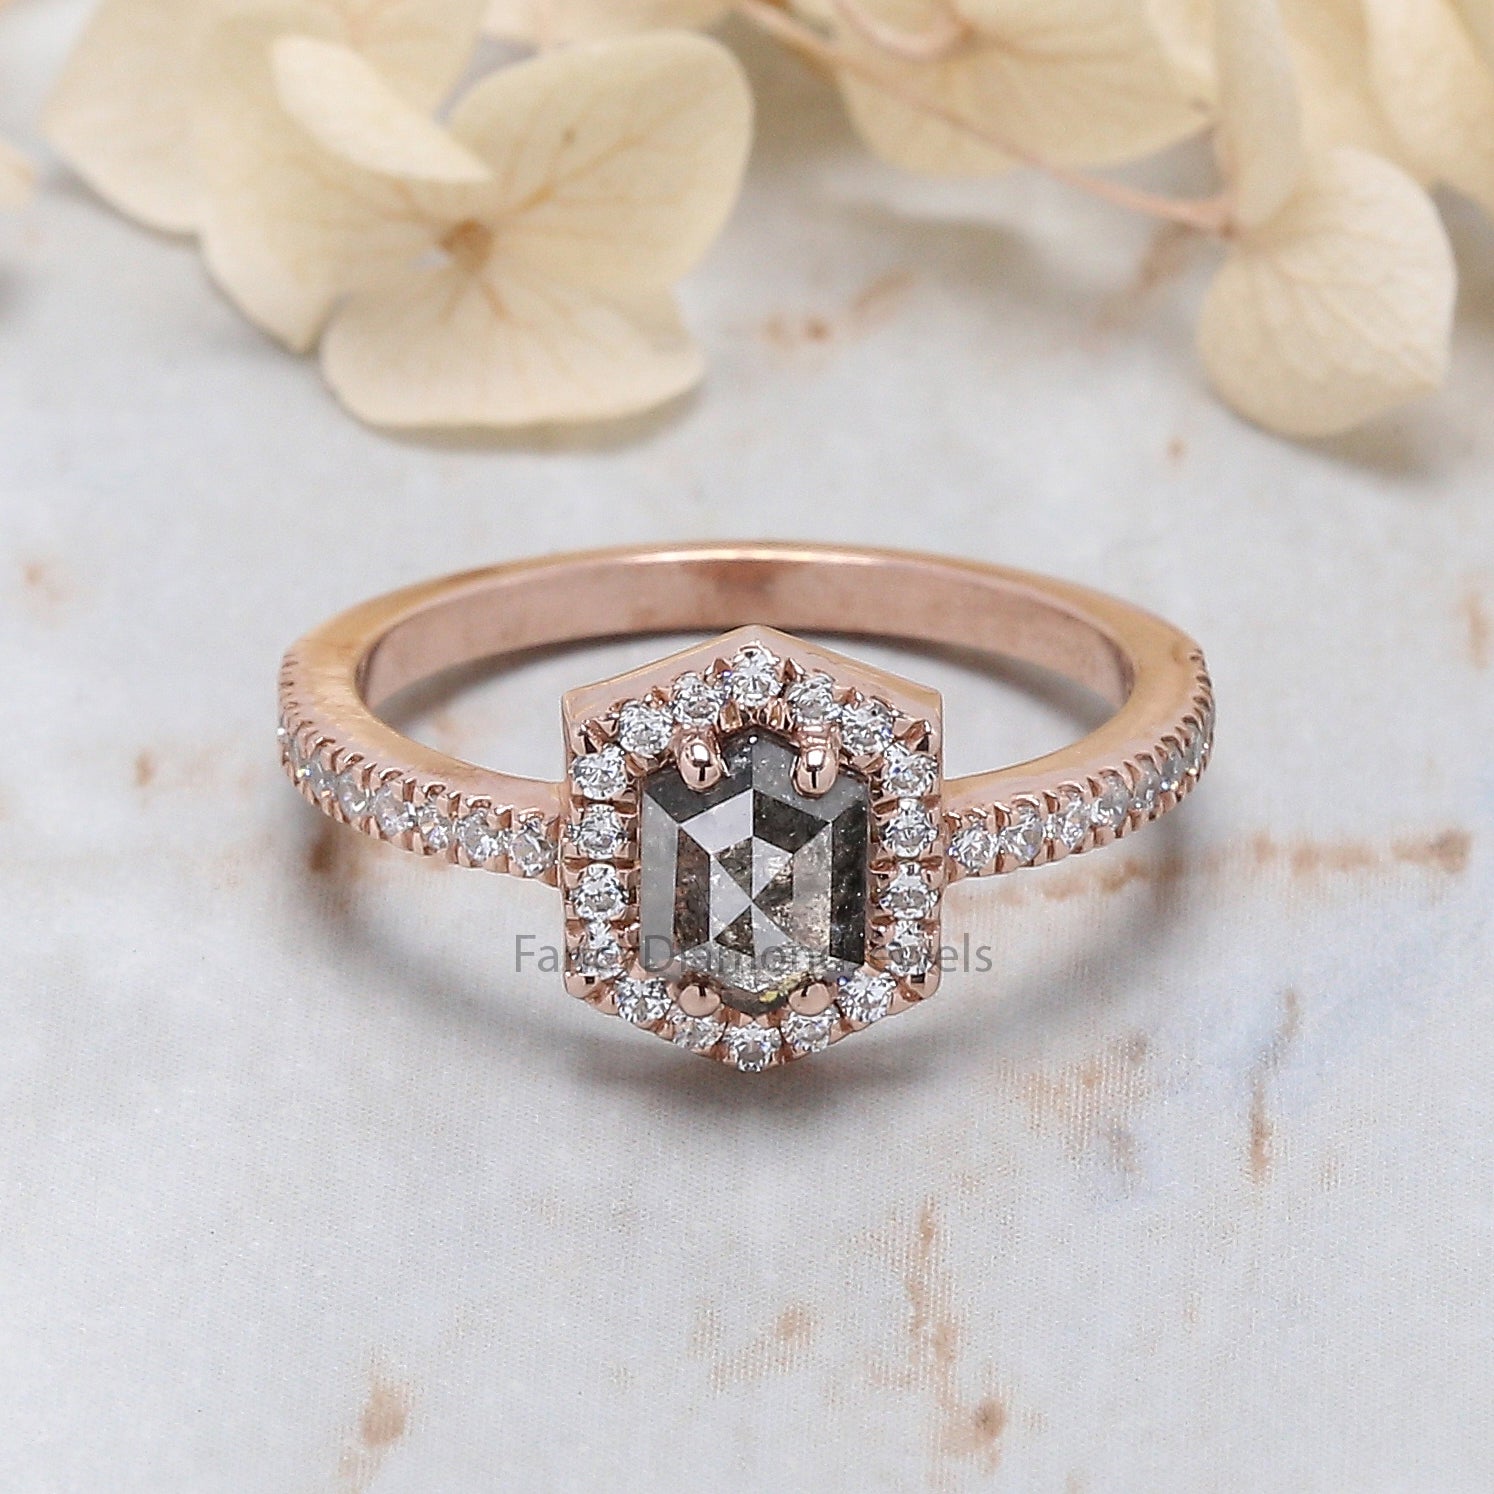 0.80 Ct Natural Hexagon Salt And Pepper Diamond Ring 6.30 MM Hexagon Cut Diamond Ring 14K Solid Rose Gold Silver Engagement Ring QN1135